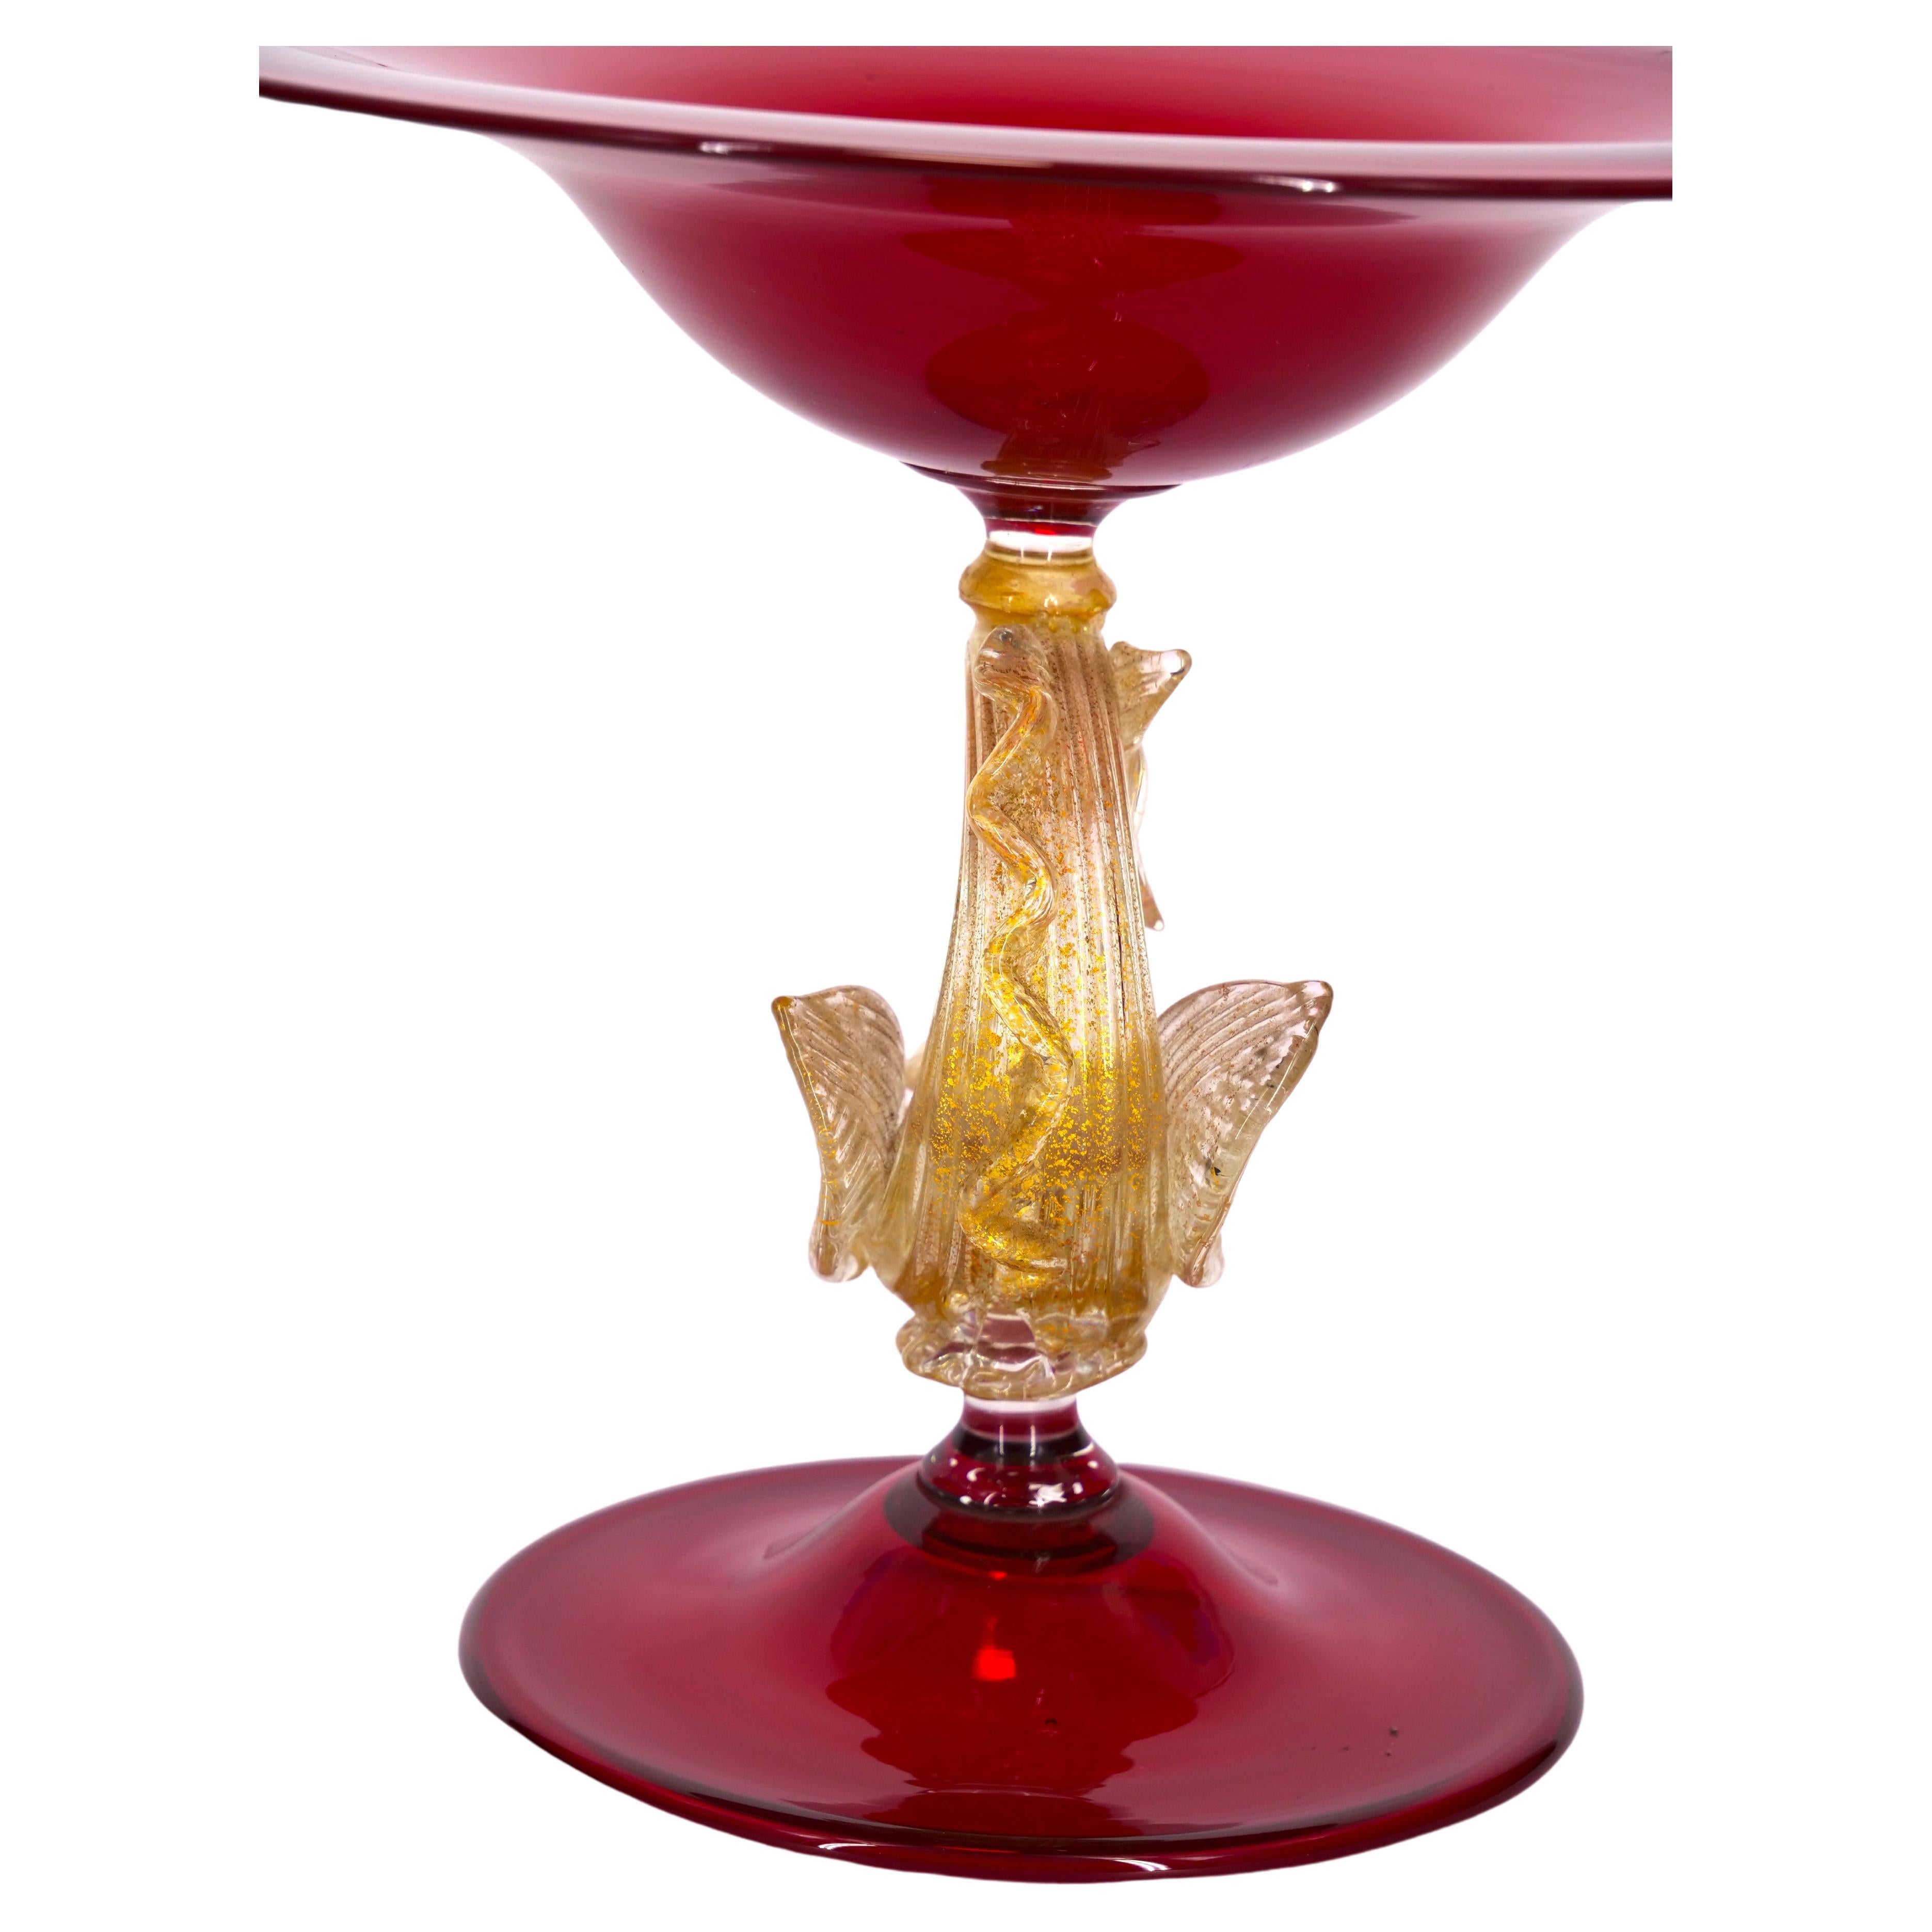 Early 20th century red Murano glass with gold flecks decorative centerpiece / compote. The decorative piece features gold flecks details and resting on gold dolphin resting on a round shape footed base. The centerpiece is in great condition. Maker's